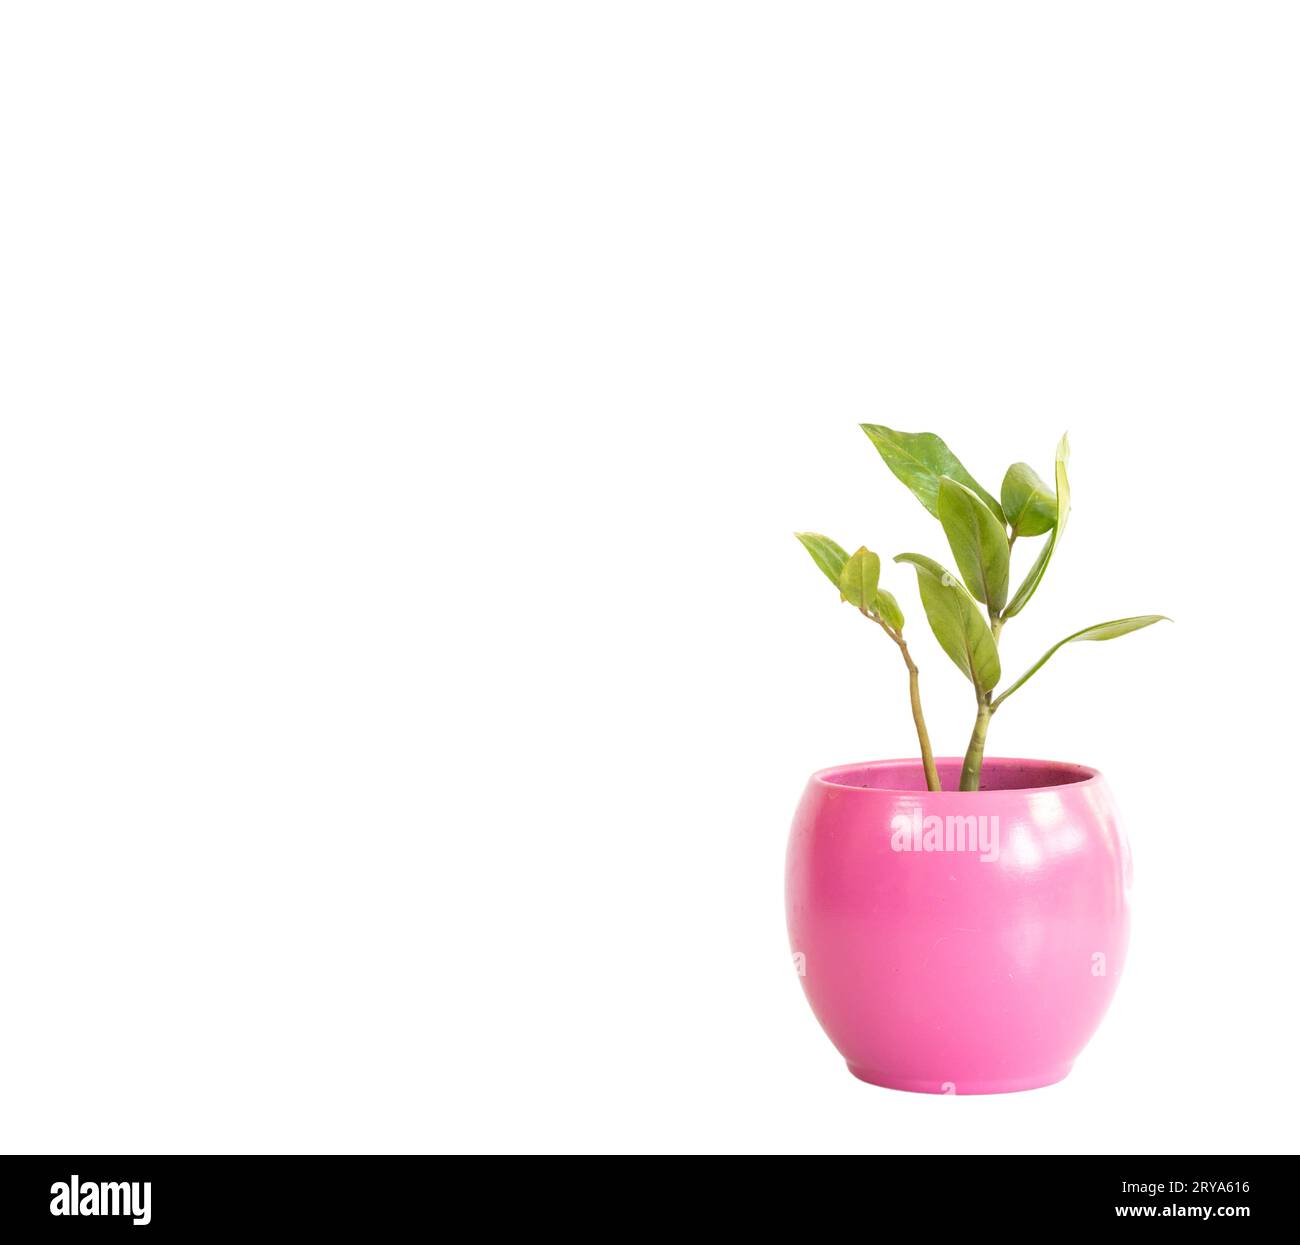 Long leaves green ZZ plant in a pink ceramic pot isolated on white background Stock Photo